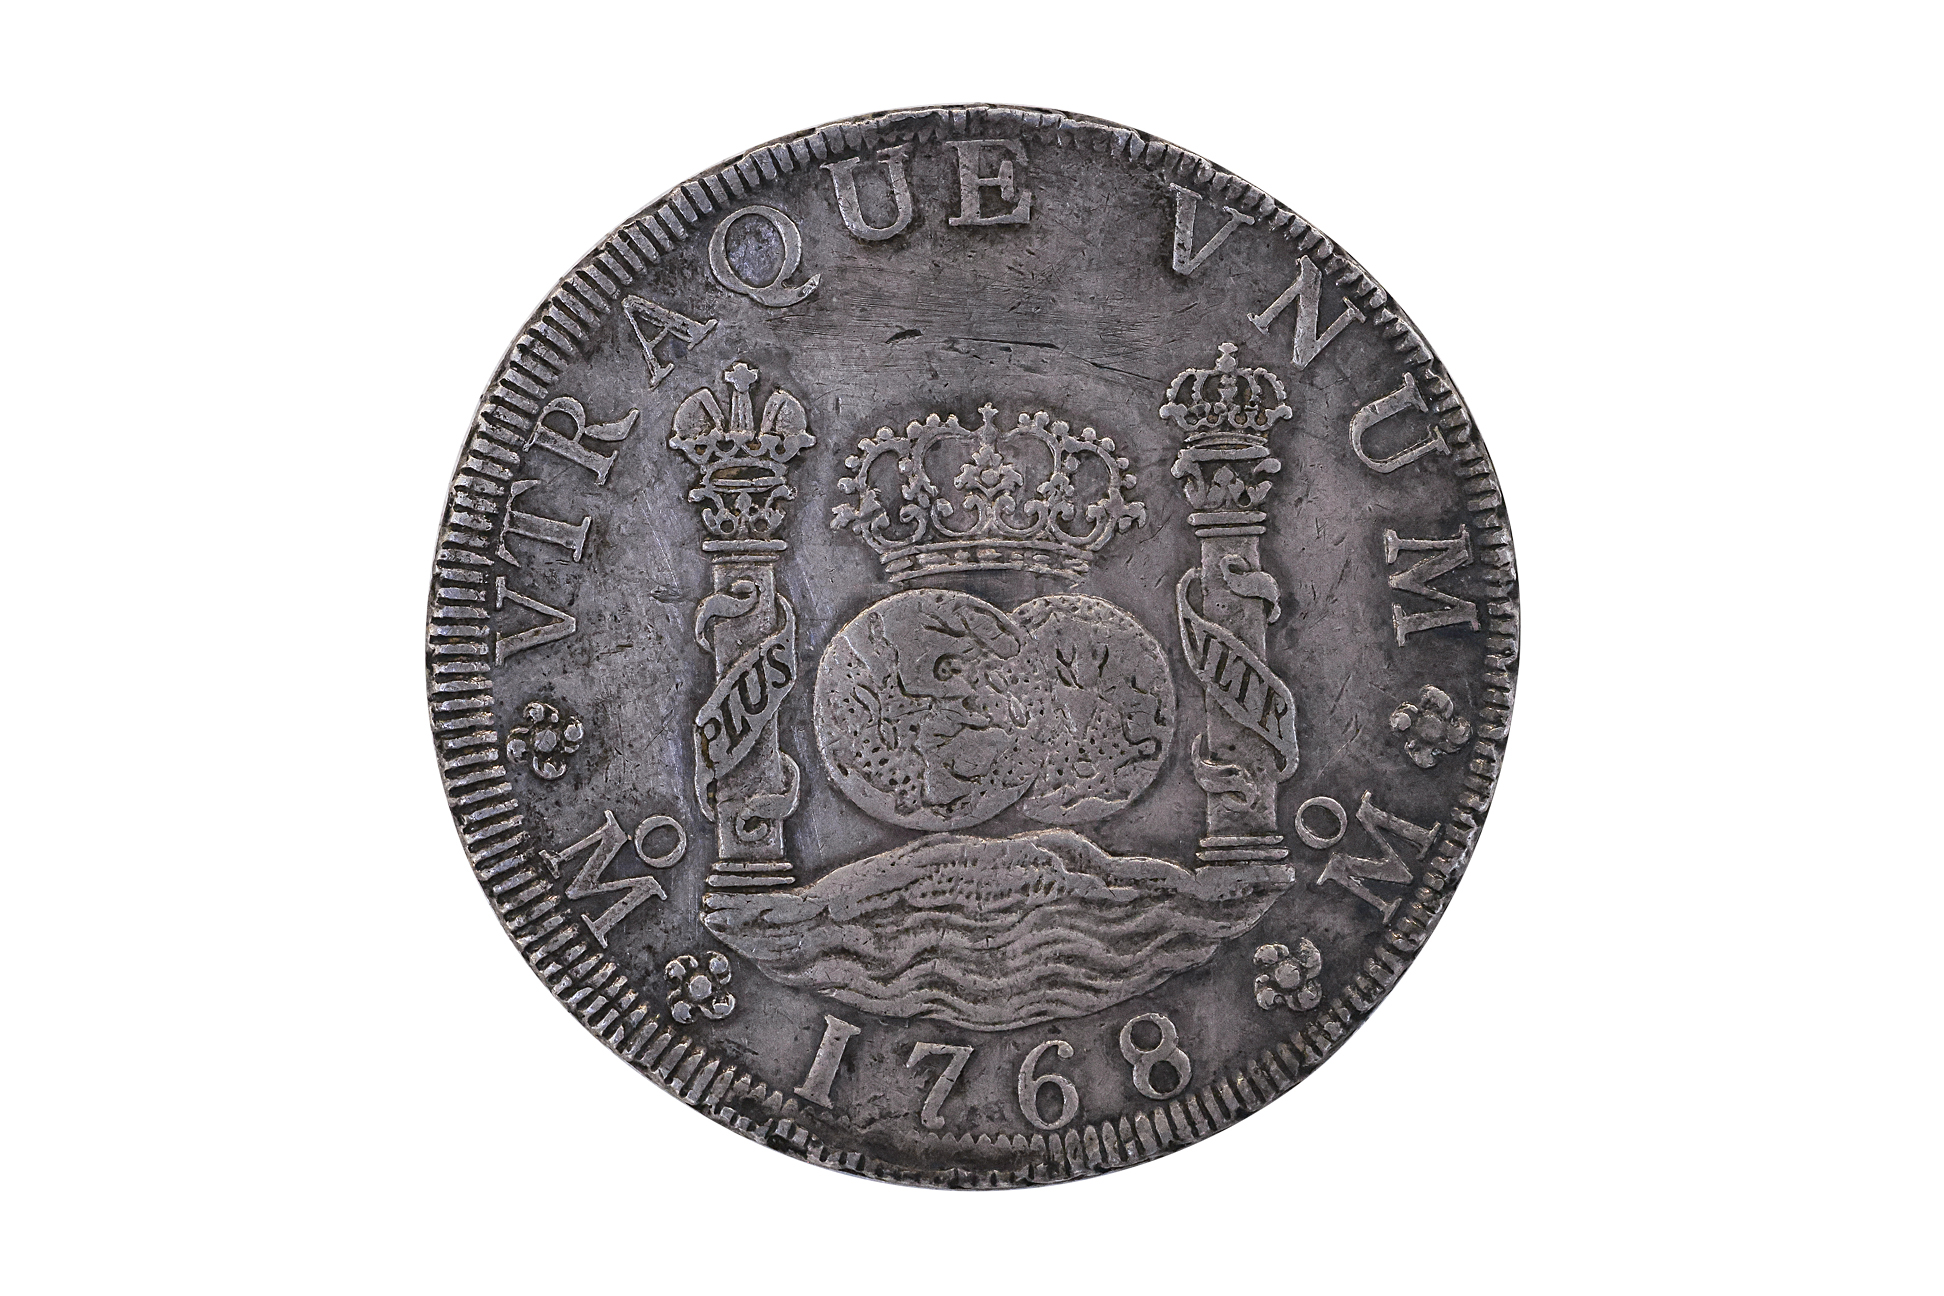 MEXICO 8 REALES PILLAR 1768 - Image 2 of 2